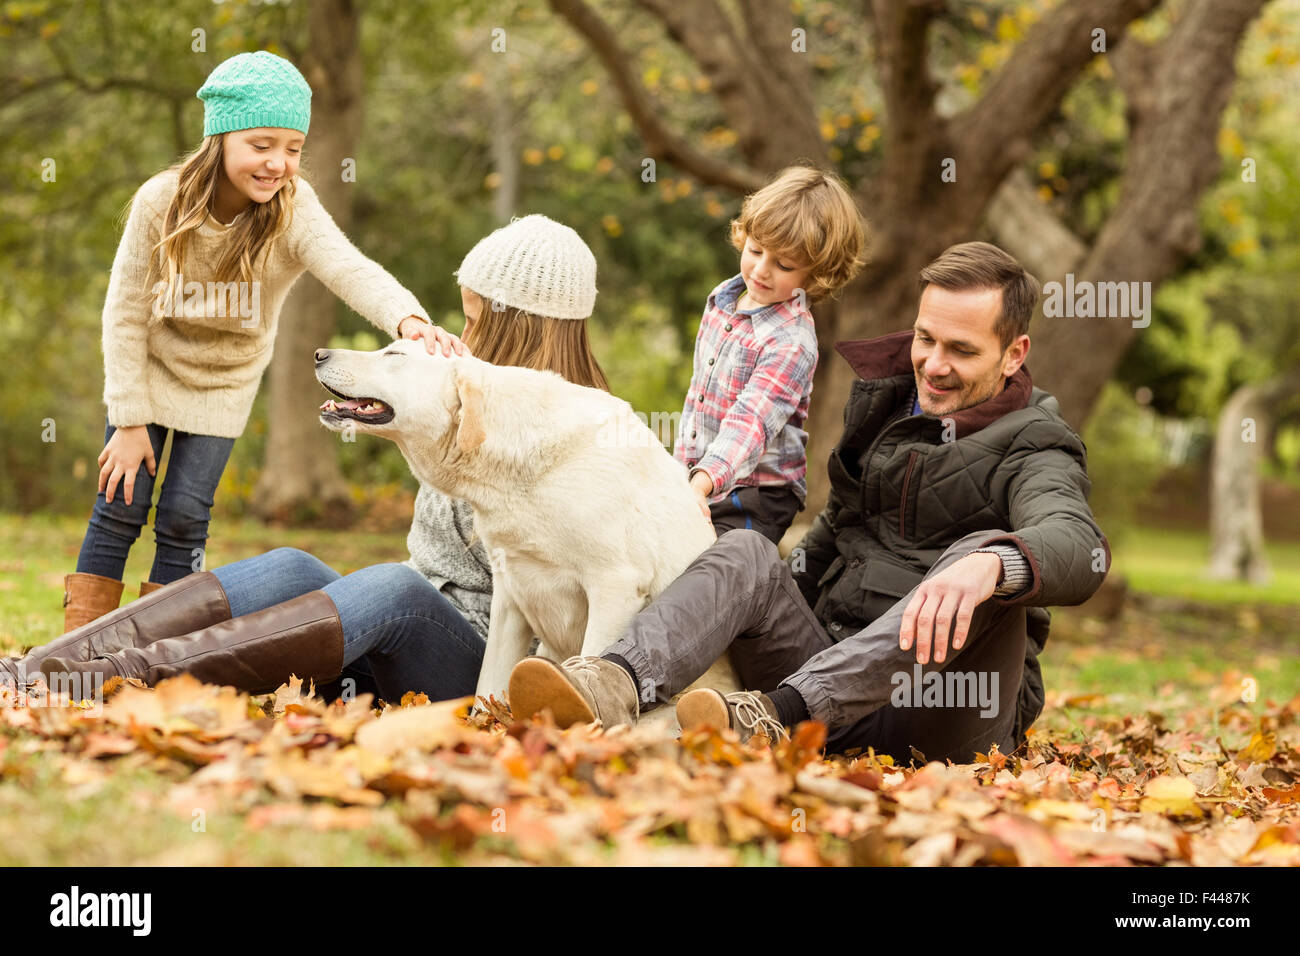 Young family with a dog Stock Photo